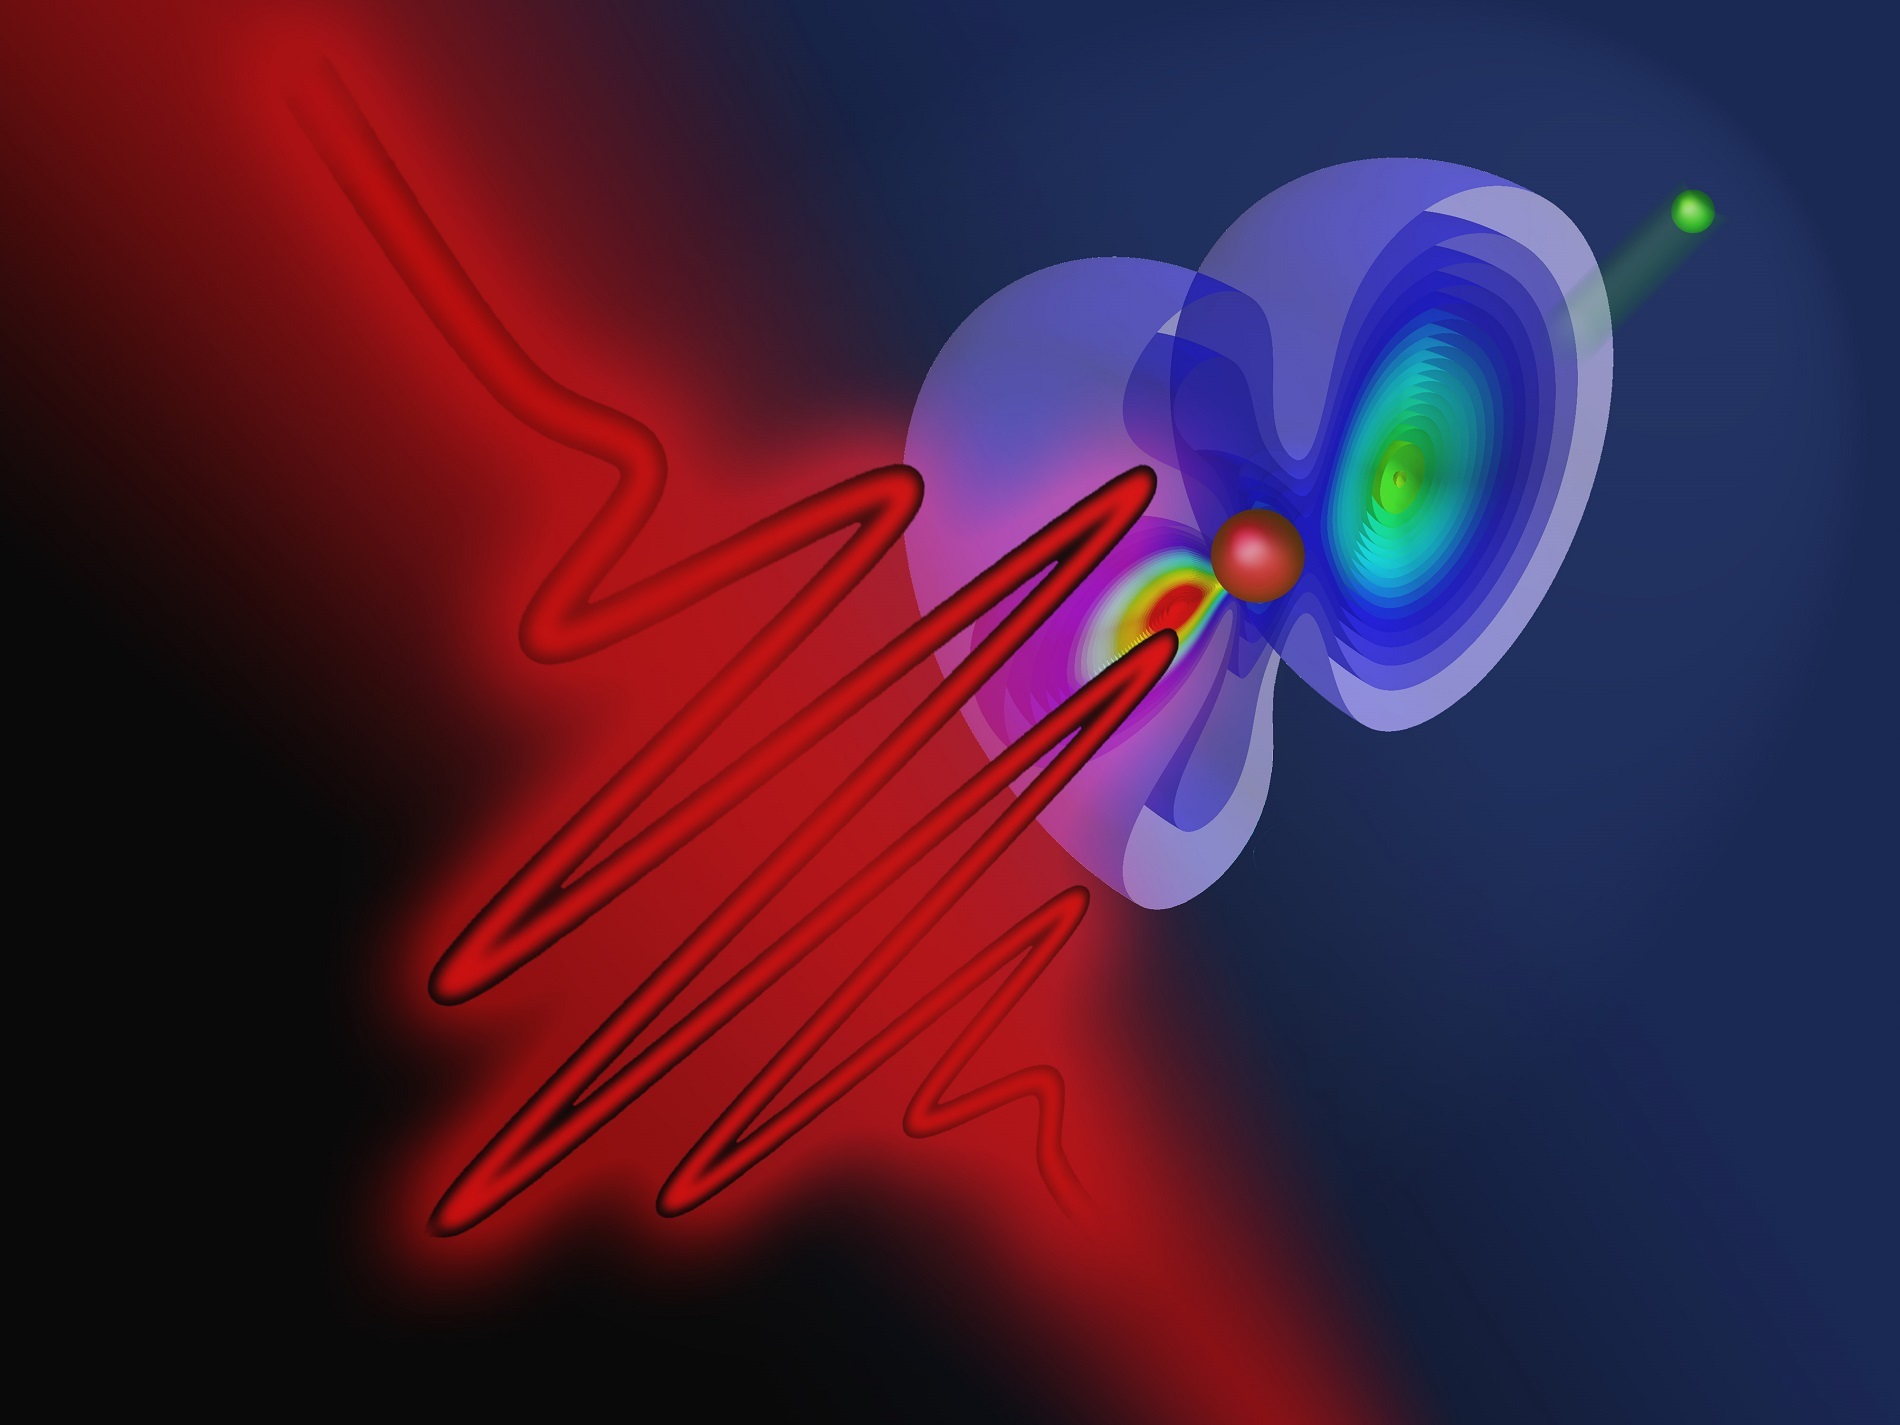 A short laser pulse can ionize a helium atom and change the quantum state of the remaining electron